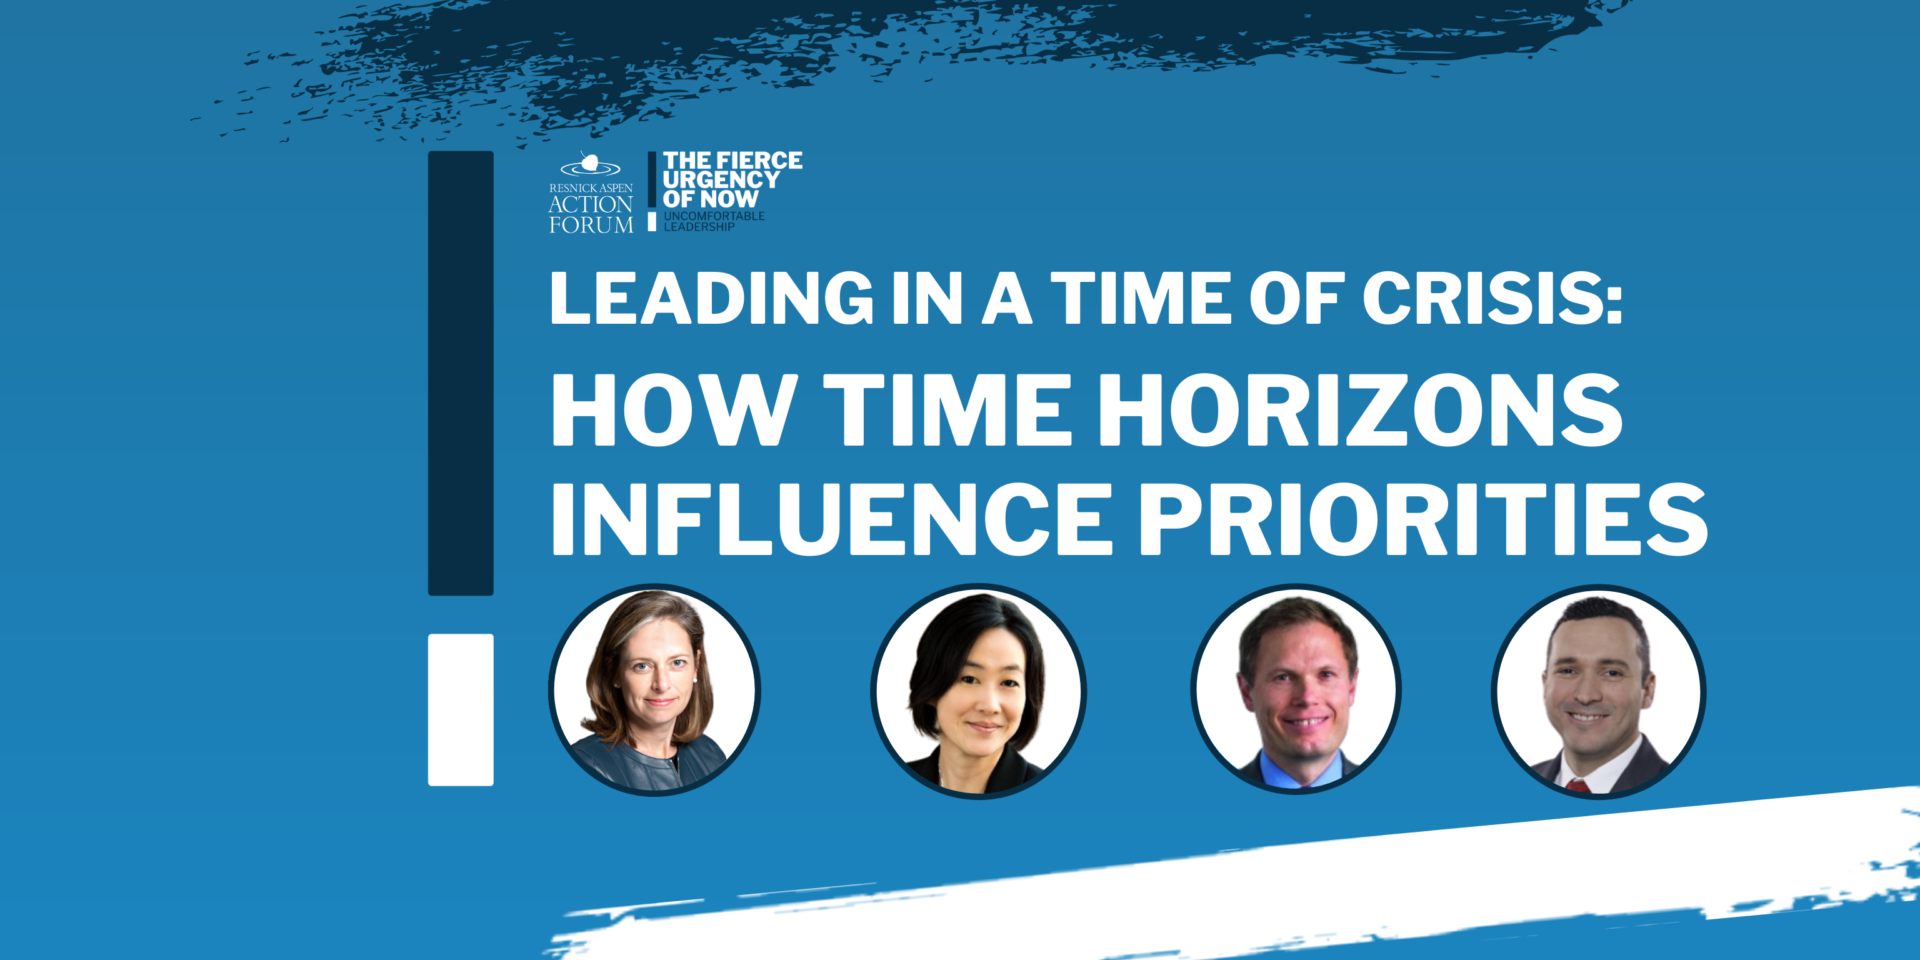 Leading in a Time of Crisis: How Time Horizons Influence Priorities